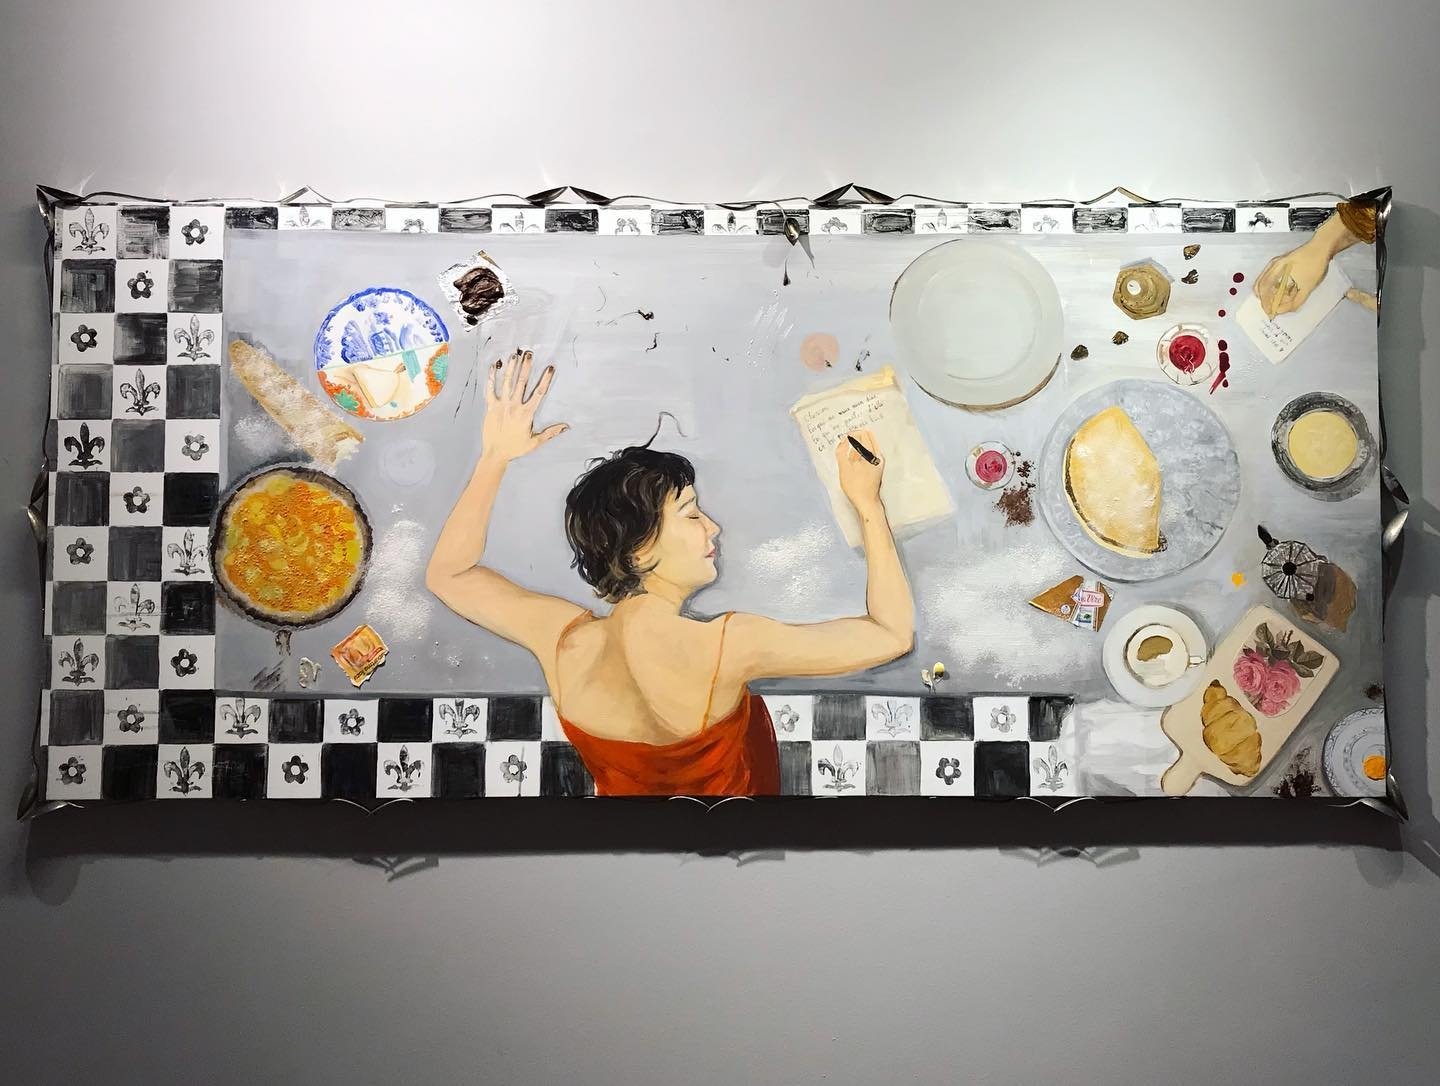 “Salle a manger” by Nihal Martlı, 2021. (Courtesy of C.A.M. Gallery)